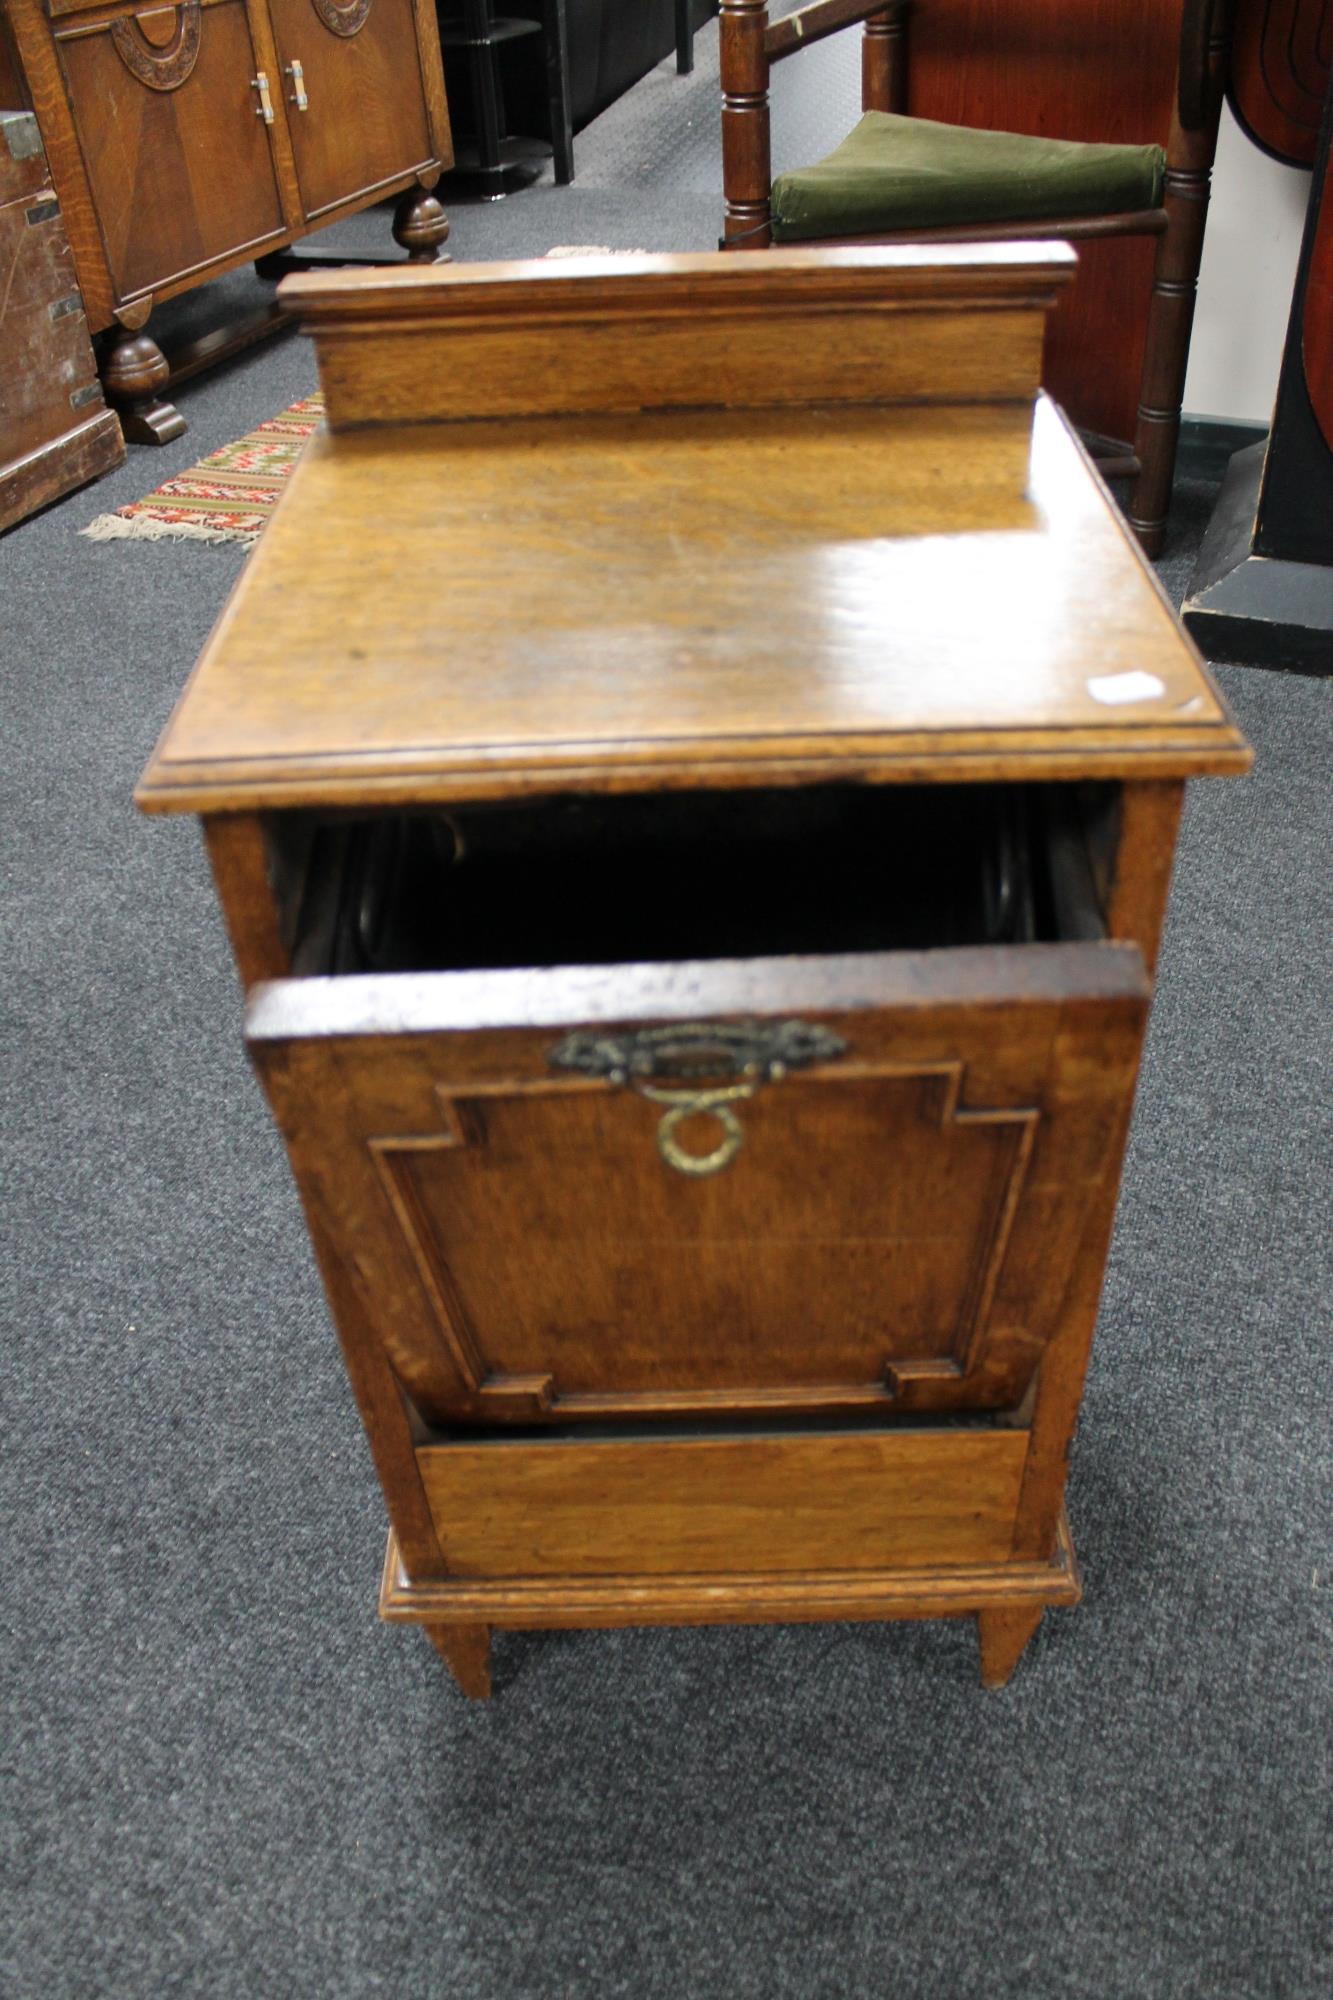 An Edwardian oak coal receiver with liner